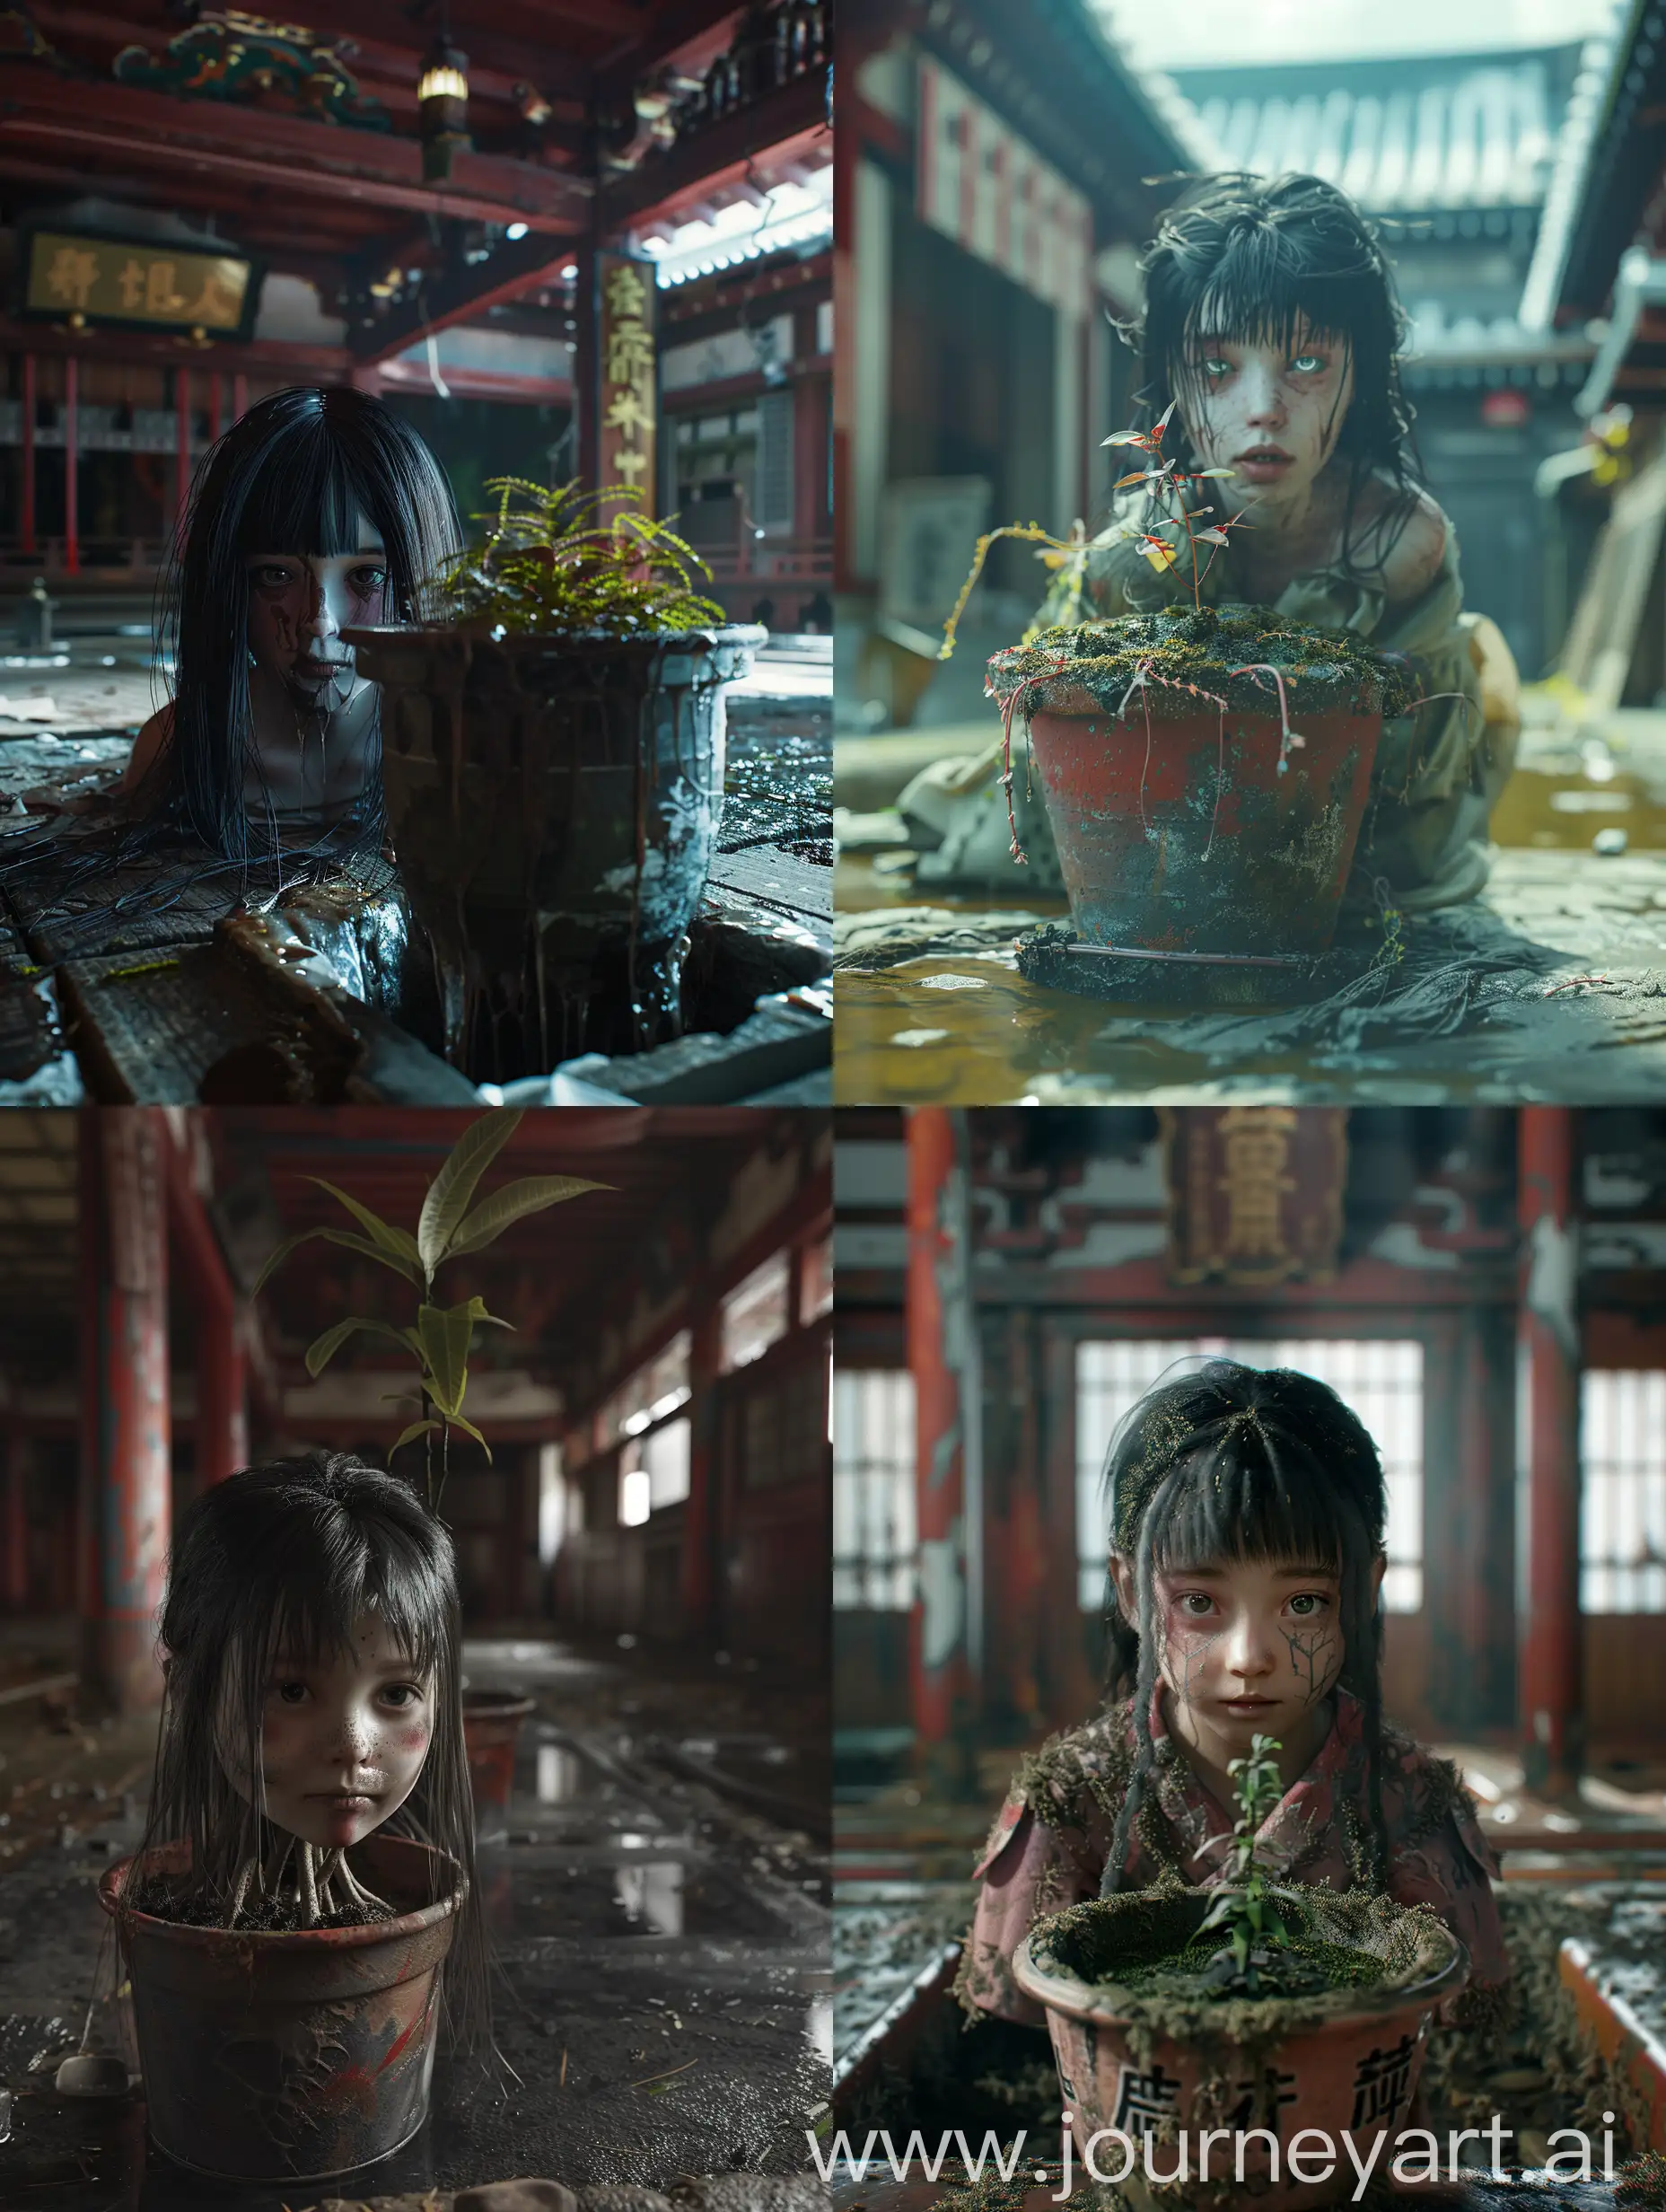 Abandoned-Japanese-Temple-Cinematic-Realism-with-Withered-Girl-Planted-in-Pot-and-Japan-Yokai